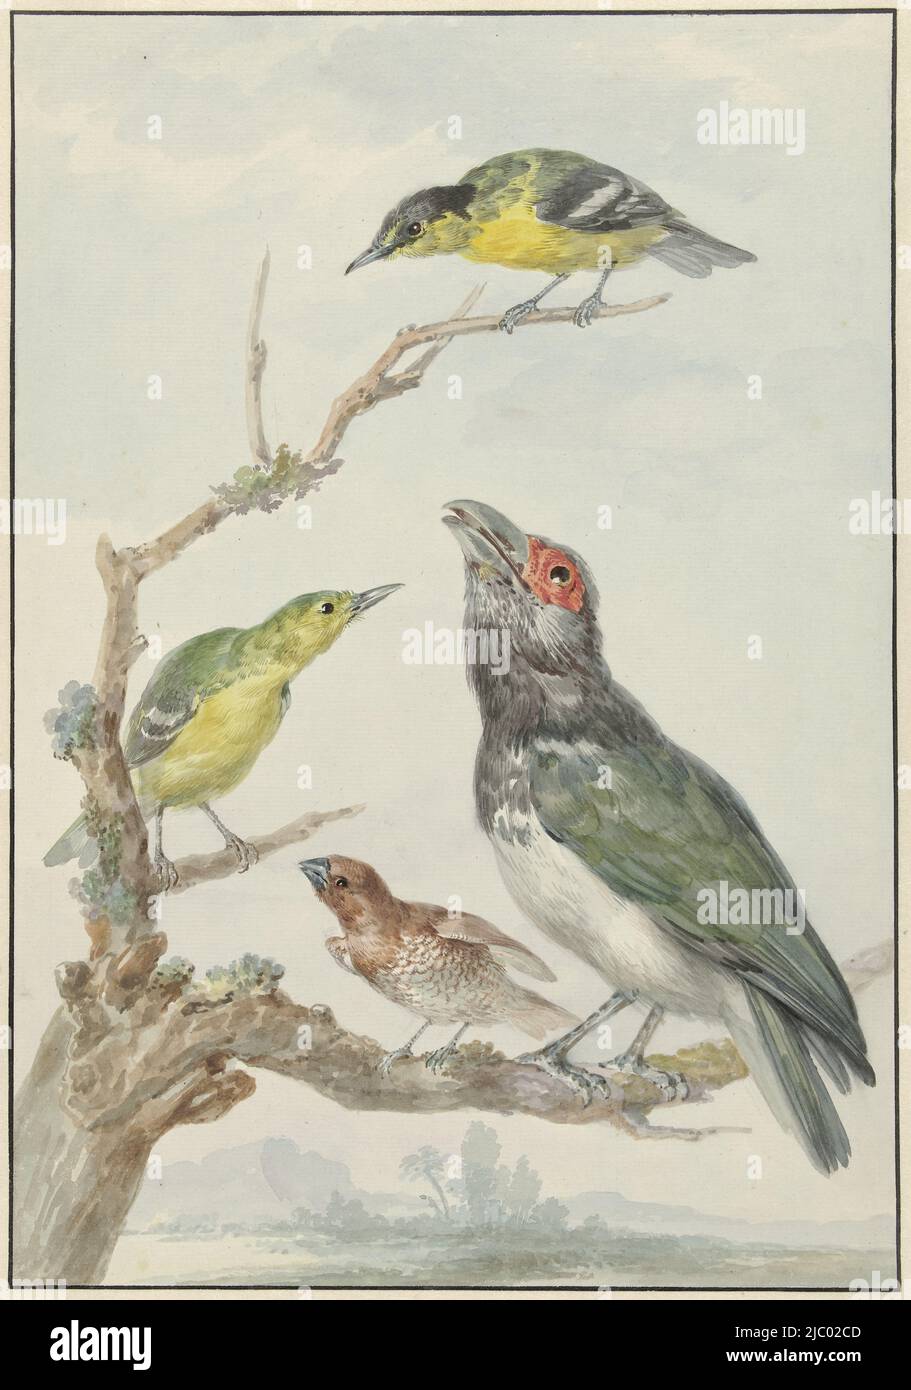 Four Different Birds on a Branch, Aert Schouman, c. 1730 - c. 1792, Four birds, from Ceylon. Above and below left: a common Iora (Aegithina tiphia), next to it a Muscat Finch (Lonchura punctulata) and a Red-cheeked Malkoha (Phaenicophaeus pyrrhocephalus), depicted with broken tail and incorrect beak., draughtsman: Aert Schouman, c. 1730 - c. 1792, paper, brush, h 371 mm × w 258 mm Stock Photo